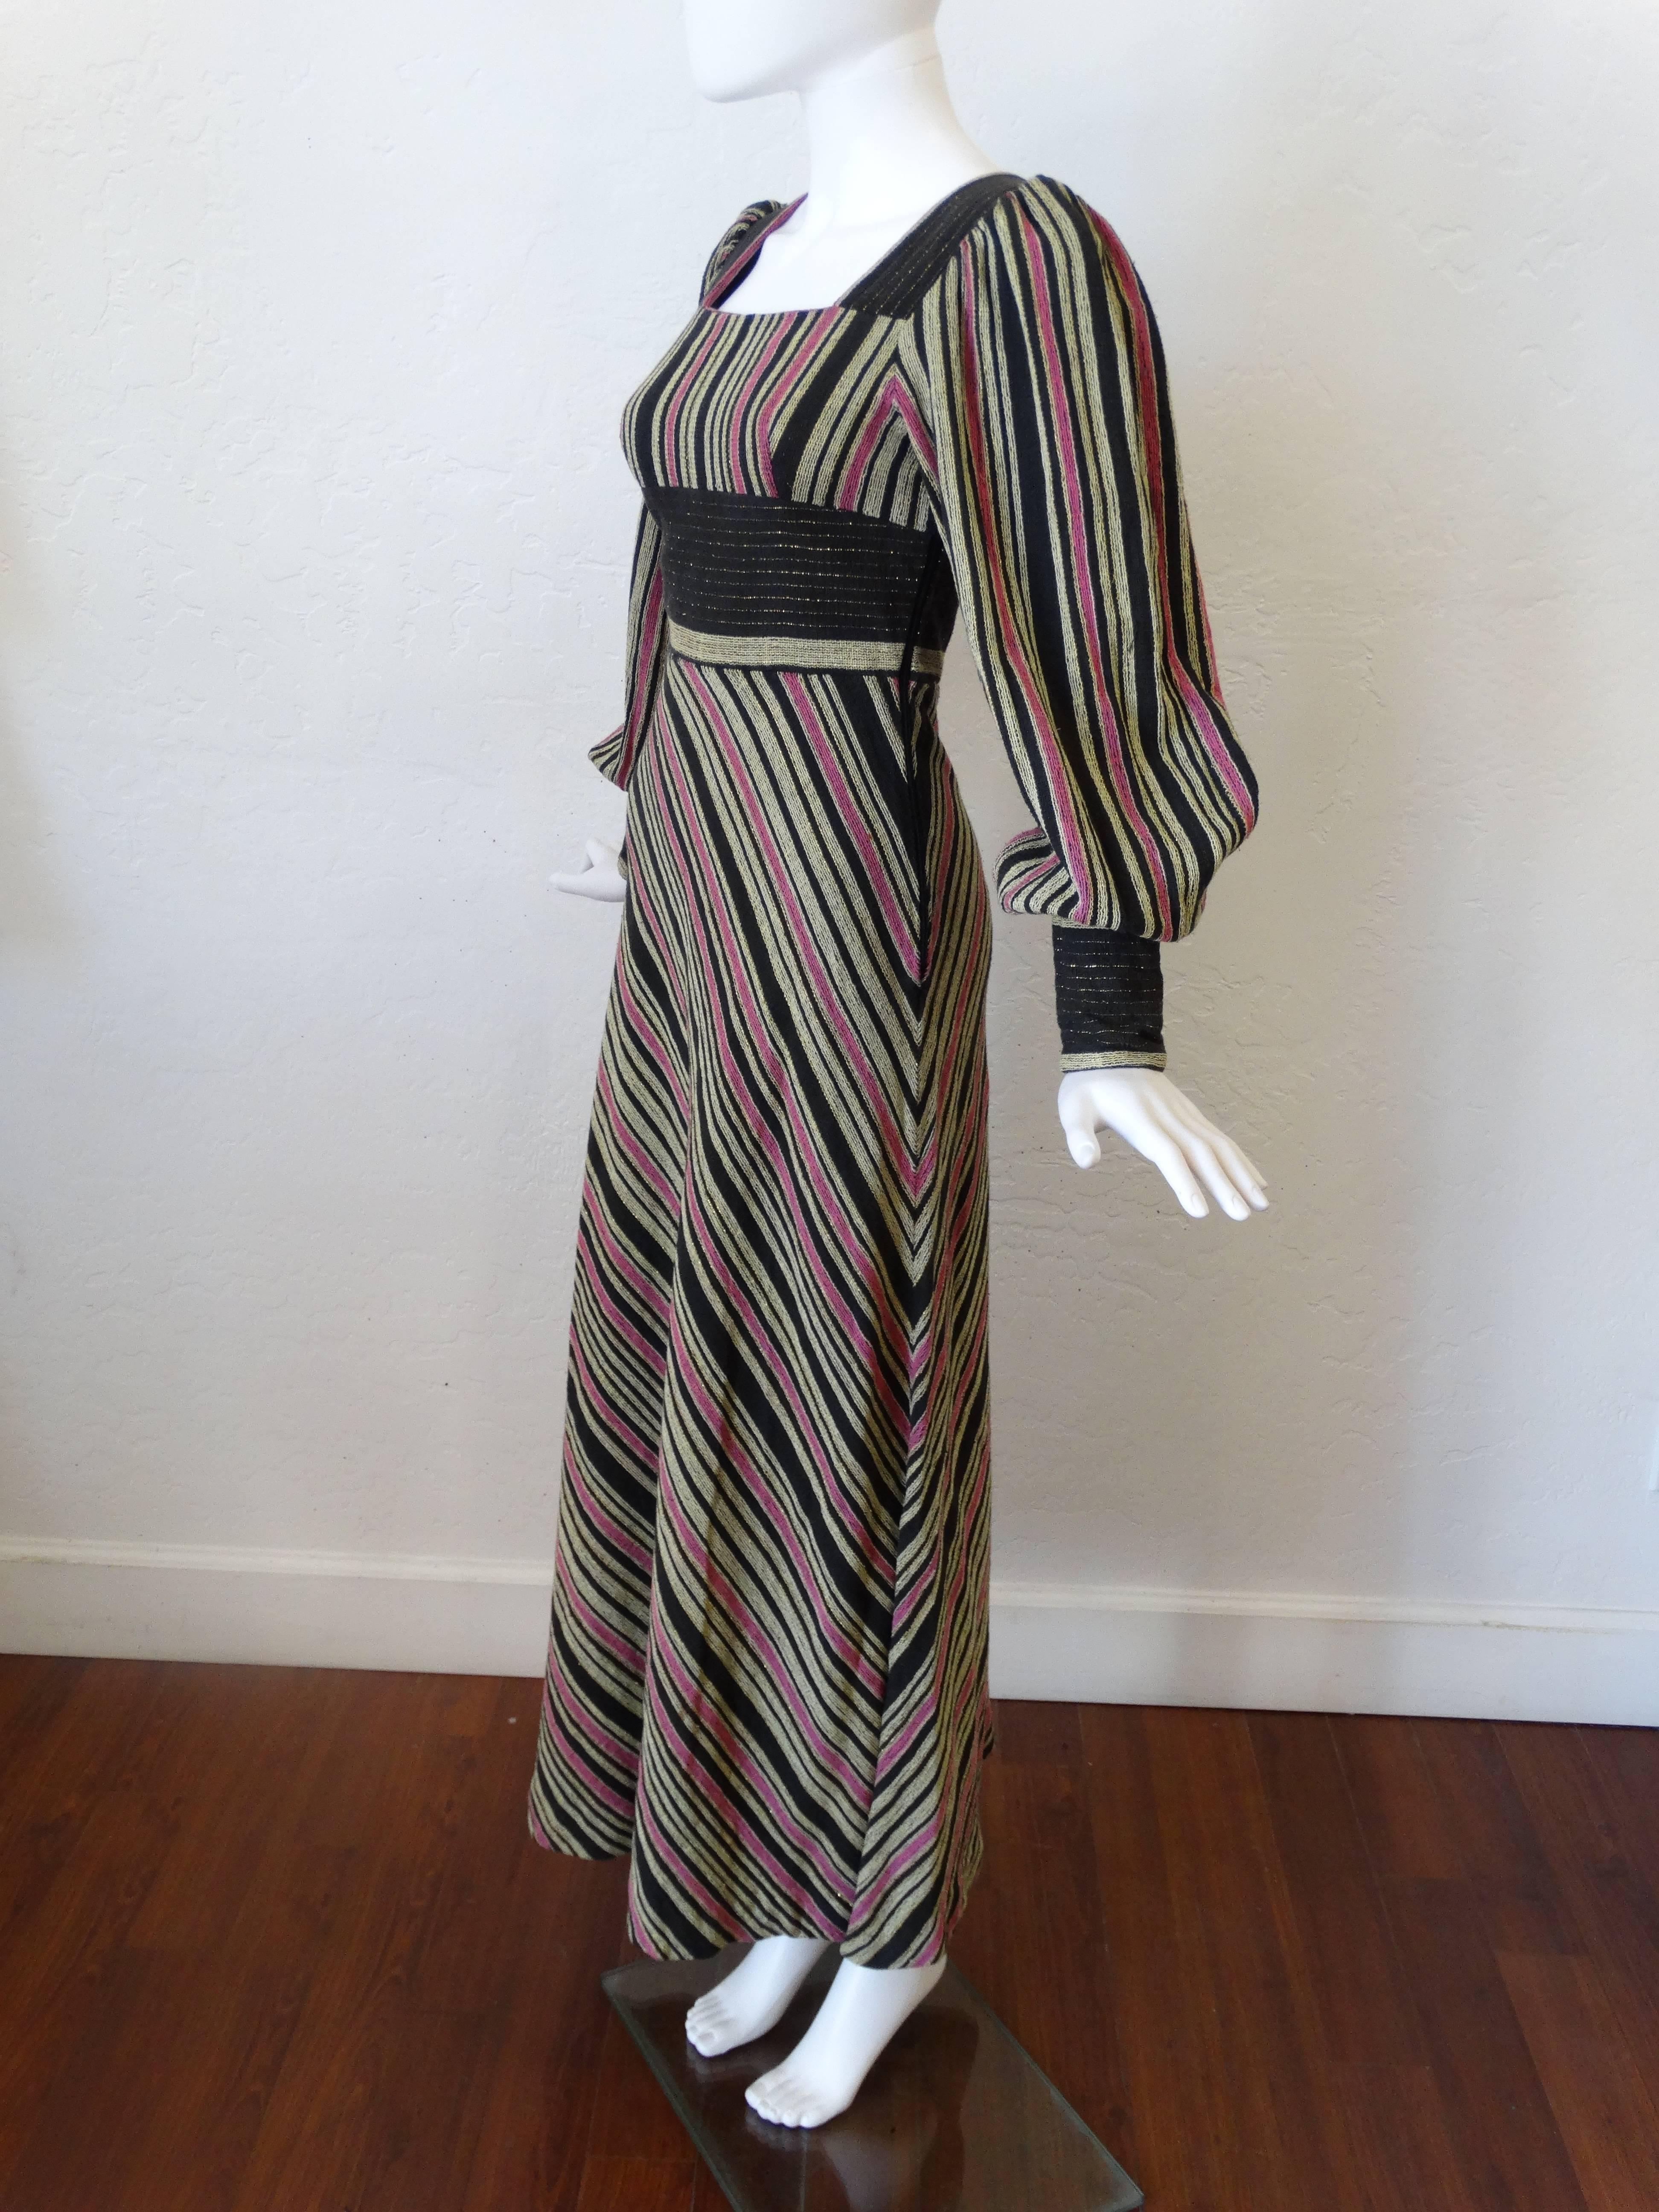 Rare RIKMA Rozi Ben-Yosef 1970's Caftan Gallabiyah maxi dress. This dress is so stunning. In a heavy thick cotton with a stripe pattern, a wide high waisted band is just one of it fabulous details. This dress has long sleeves with zippers at the